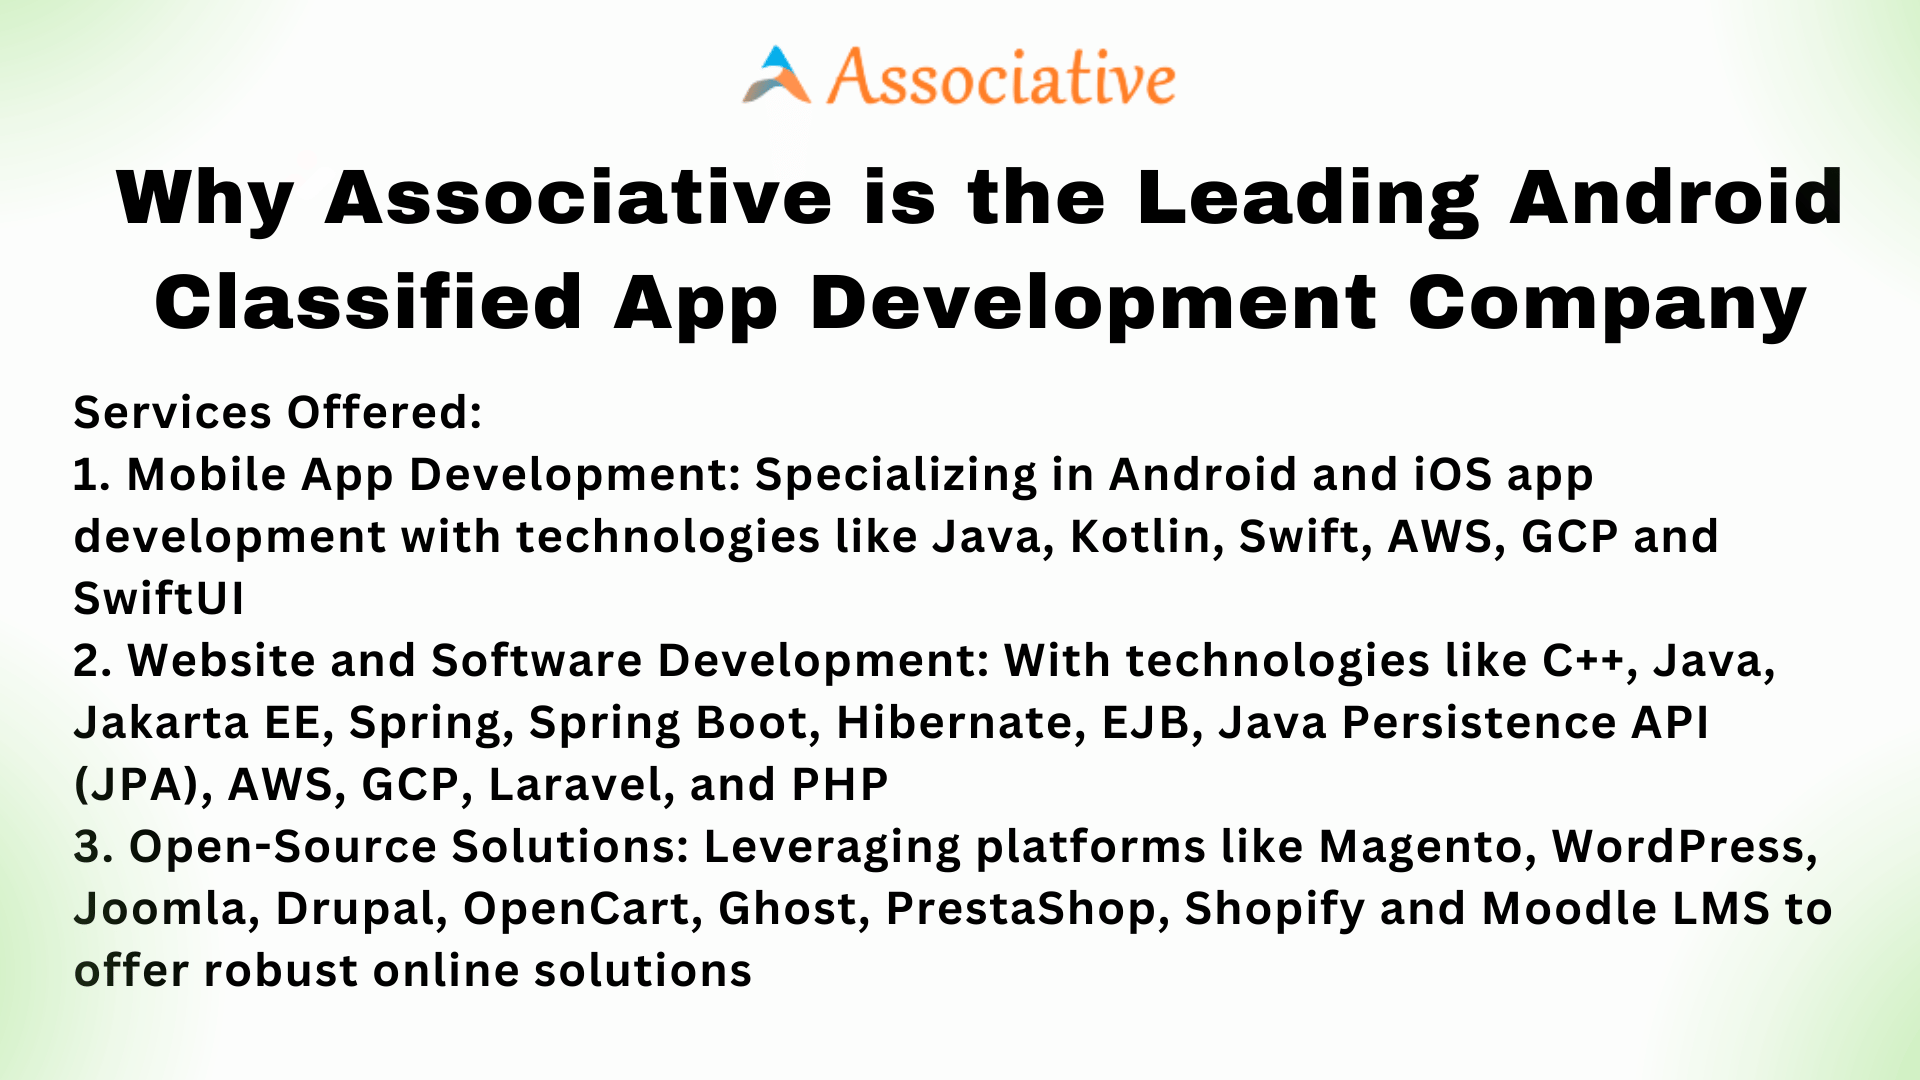 Why Associative is the Leading Android Classified App Development Company